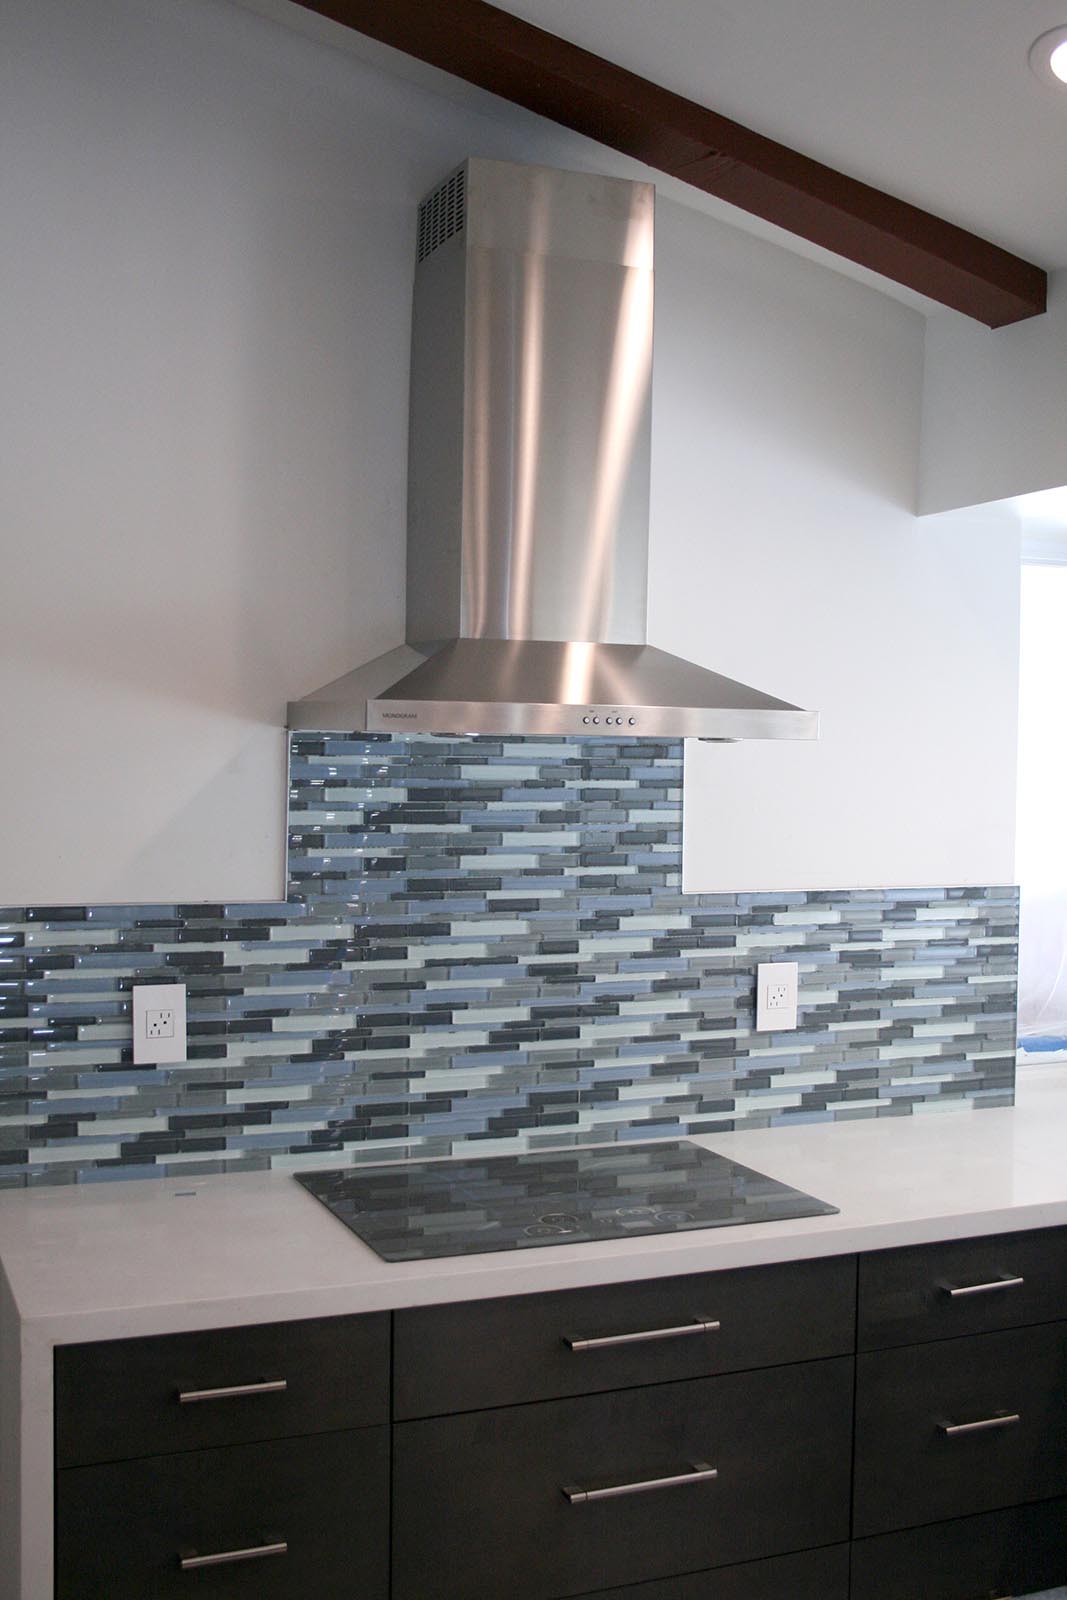 Stainless steel hood with glass cook-top and glass mosaic backsplash